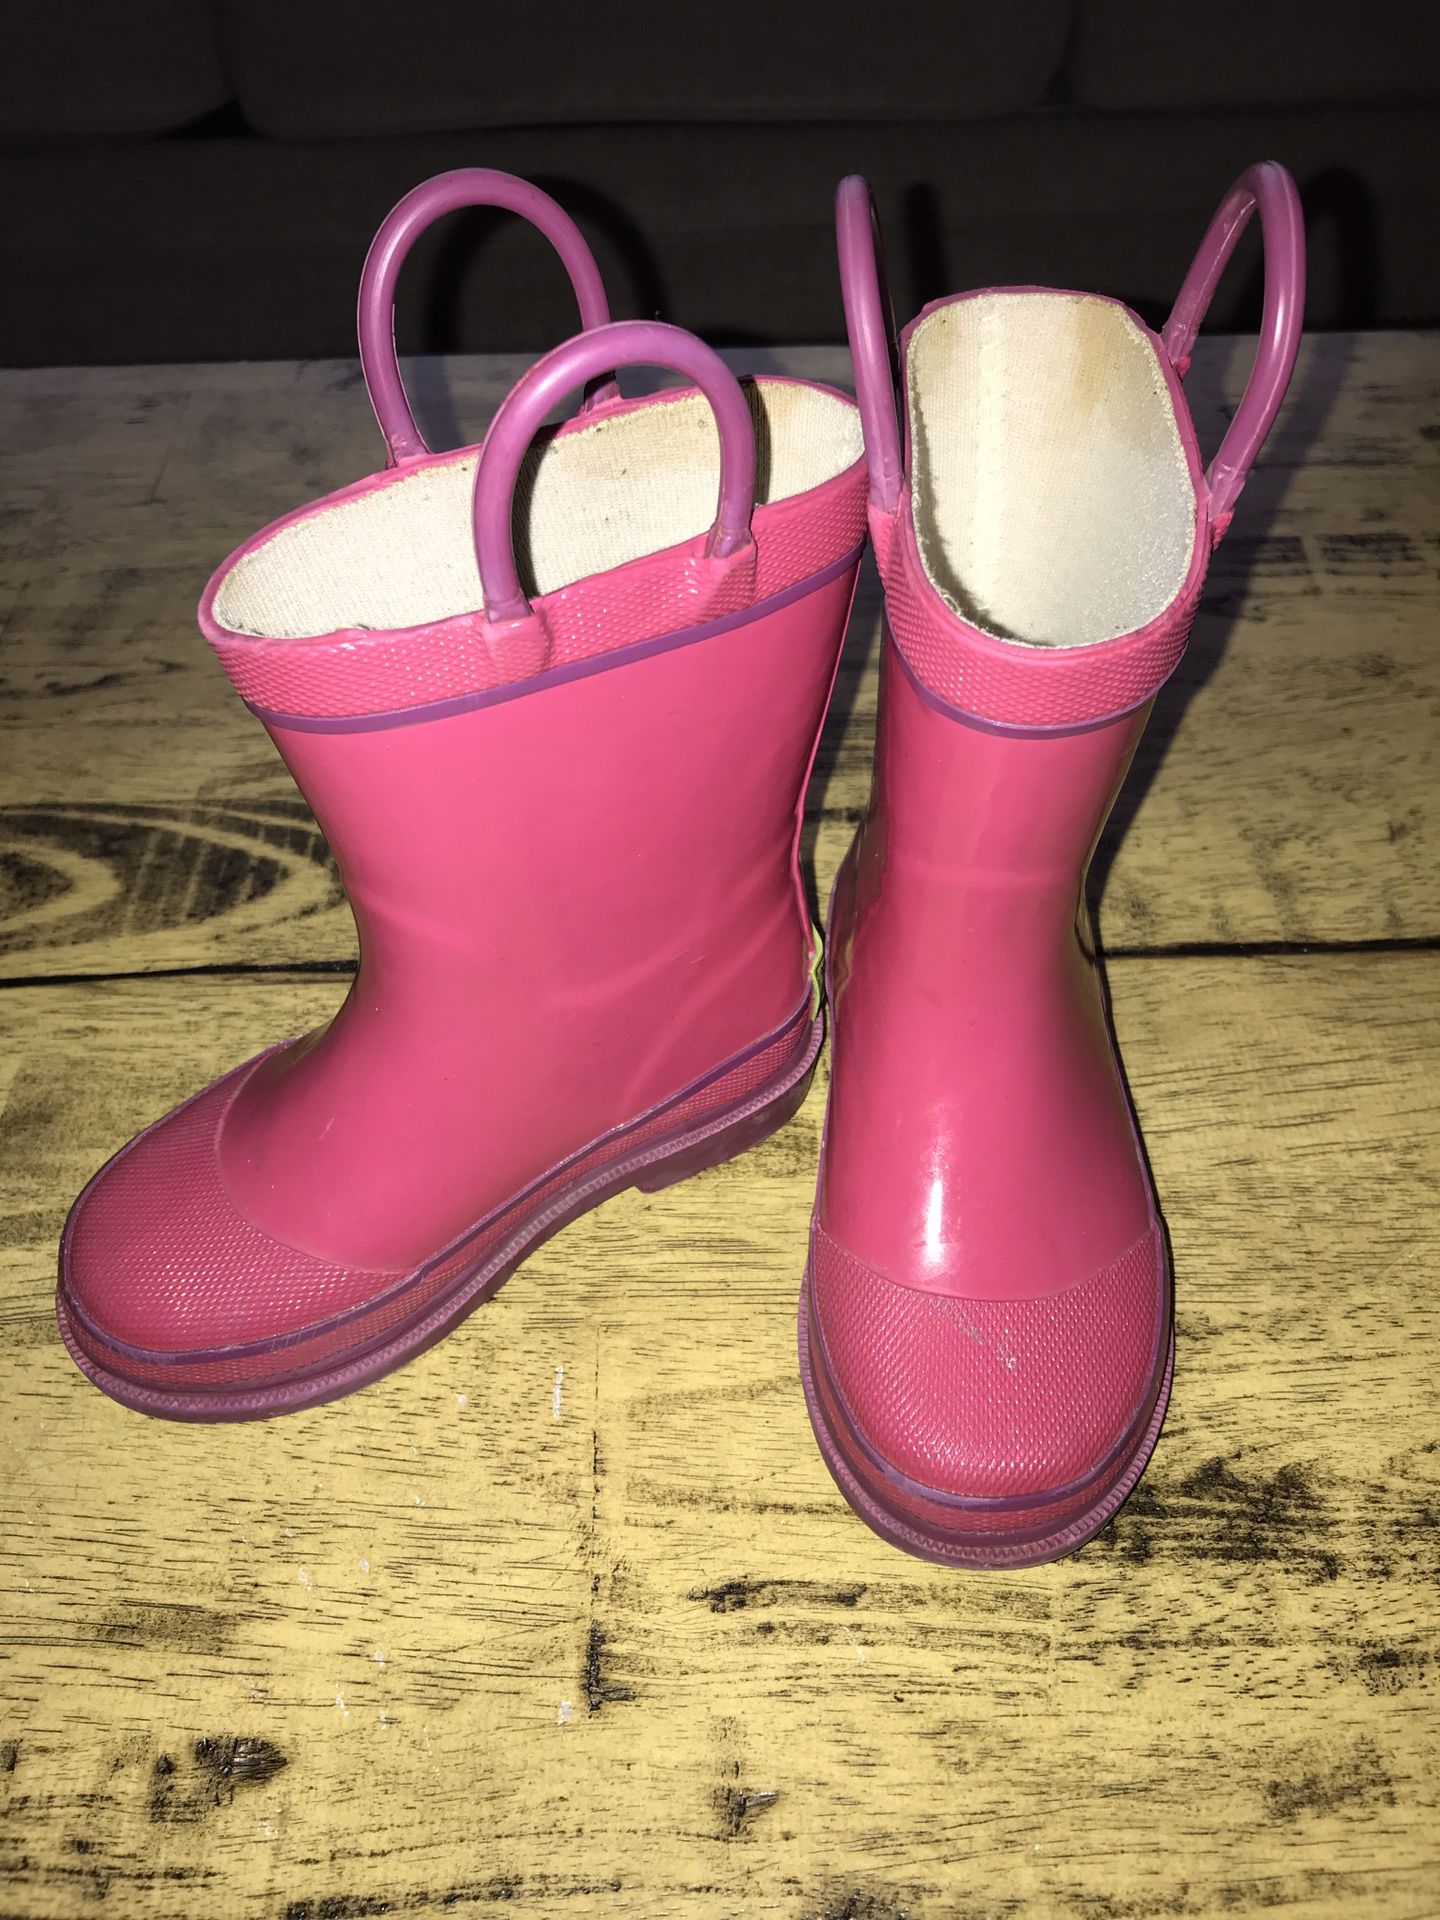 Toddler Girl Size 7 Western Chief rain boots